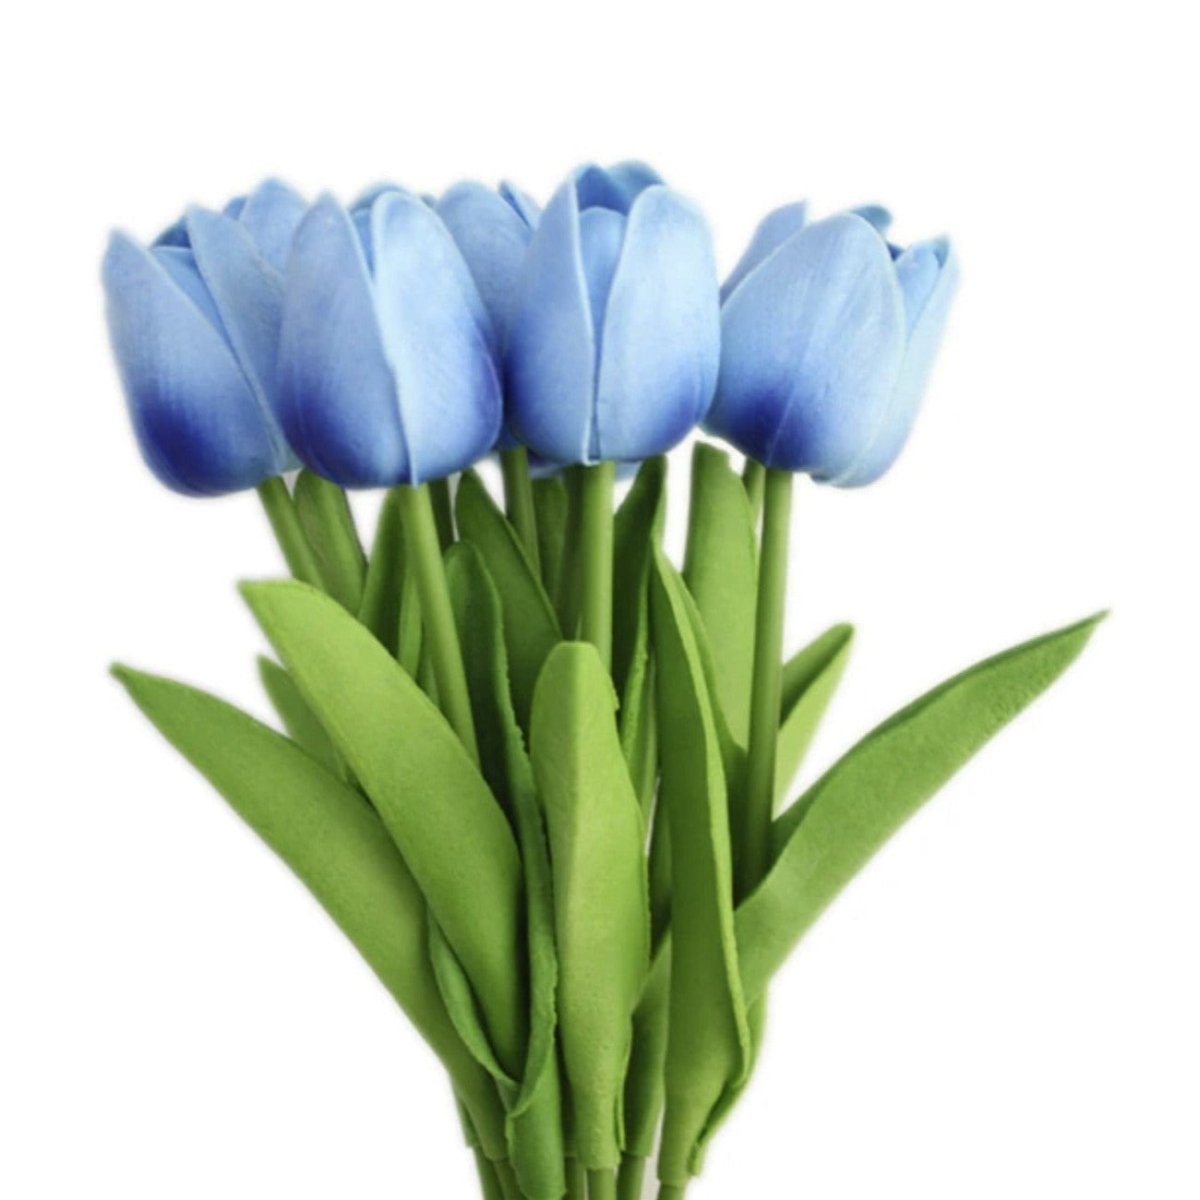 10x Artificial Tulips Flowers 35cm Stem Bouquet Fake Flower Wedding Bridal Decoration - Blue Shades - - Asia Sell